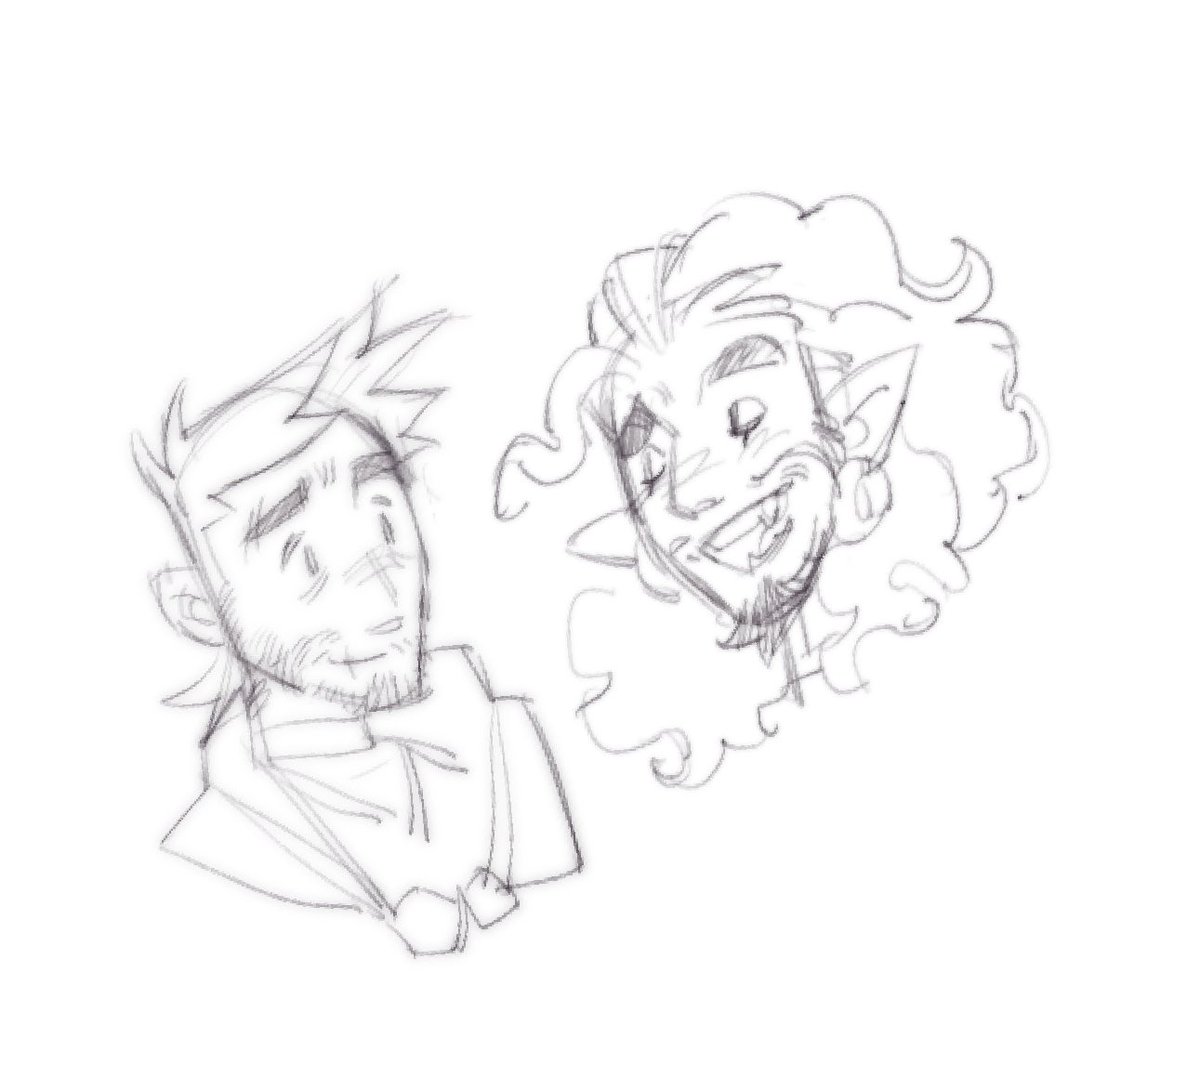 Messy wrathion and Anduin in sketch